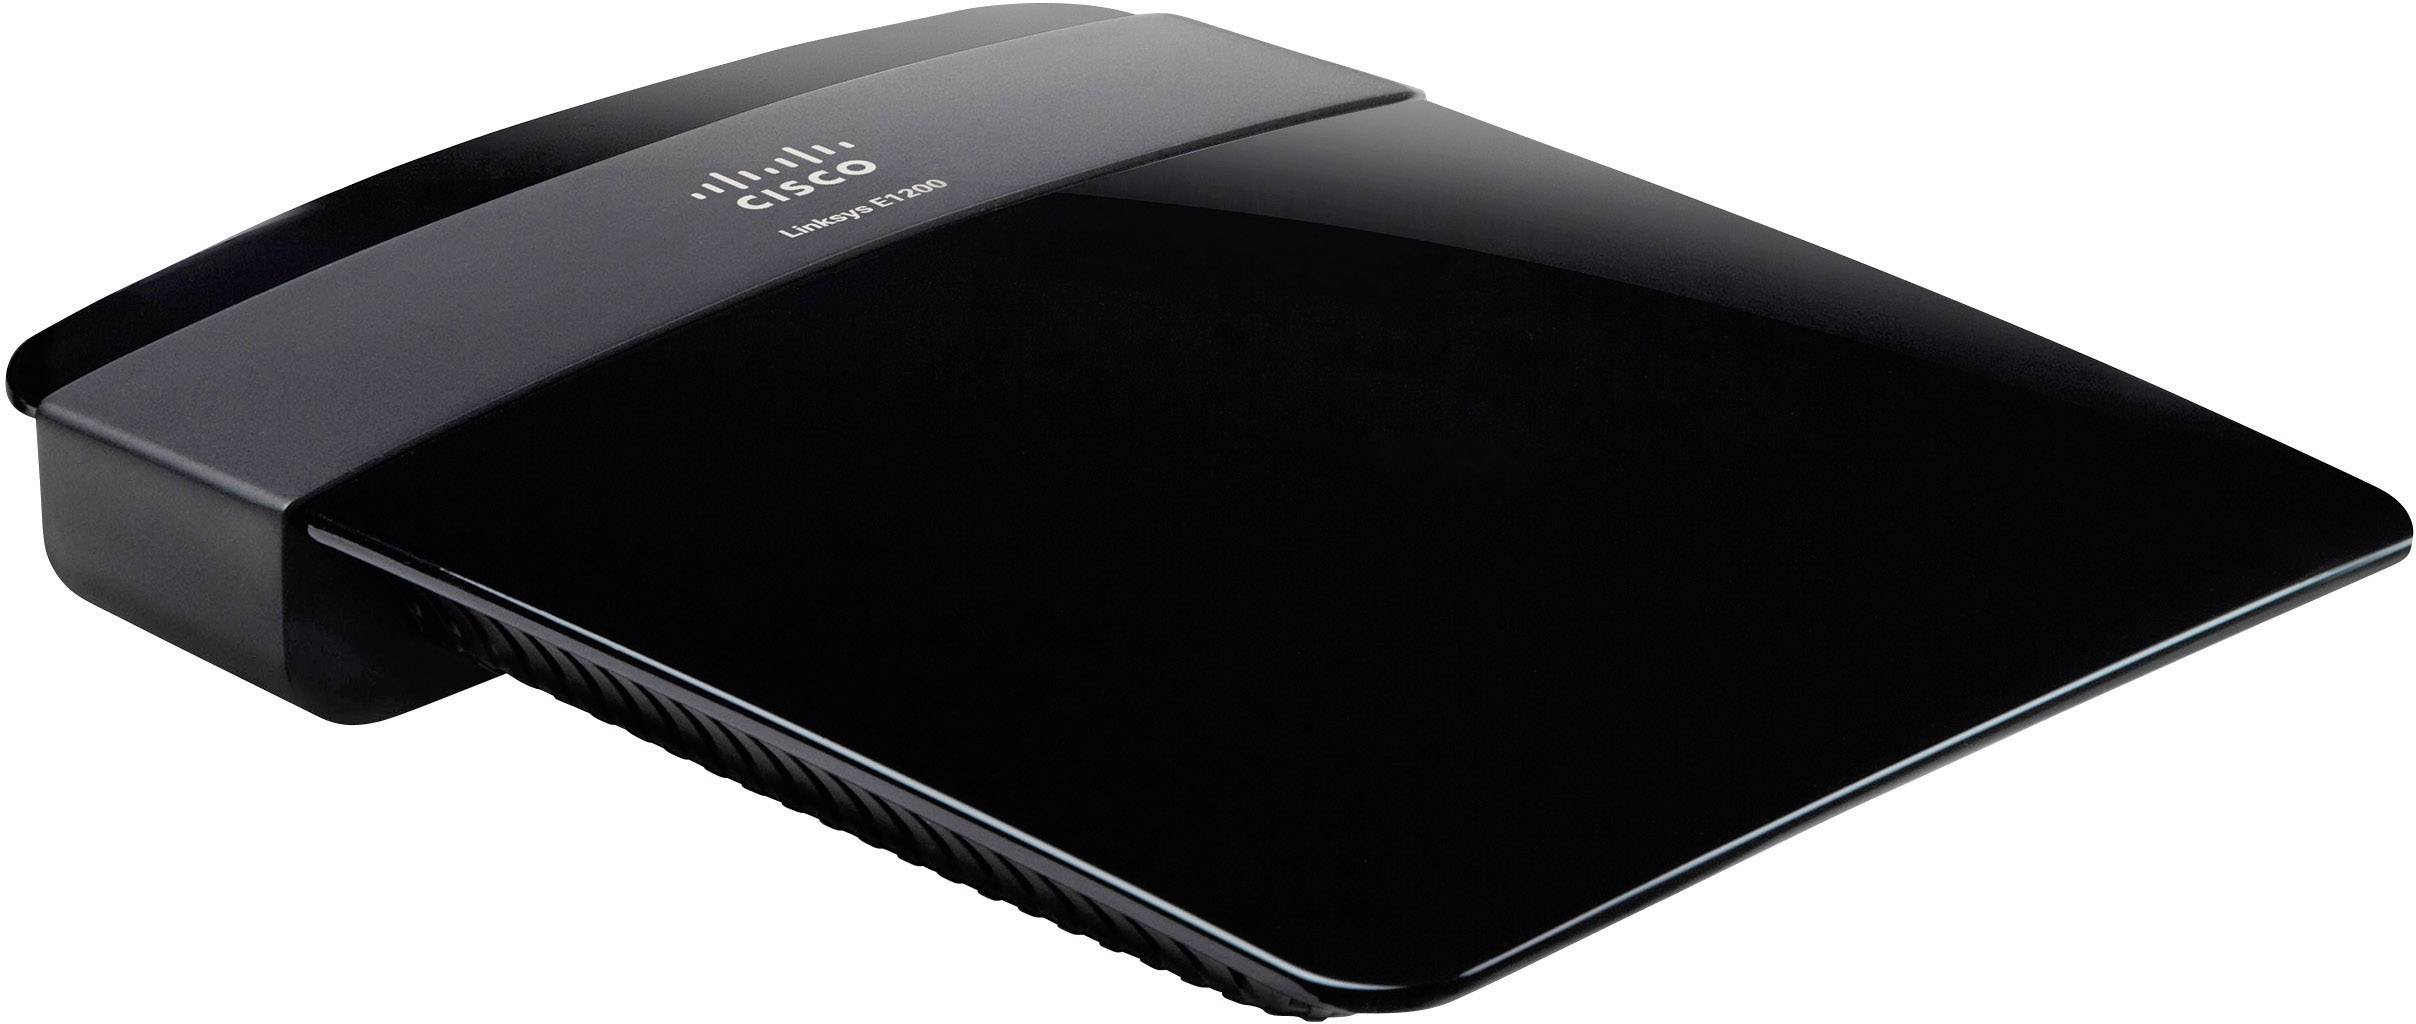 Rondsel mout Normaal Linksys E1200 WiFi-router 2.4 GHz 300 MBit/s | Conrad.nl